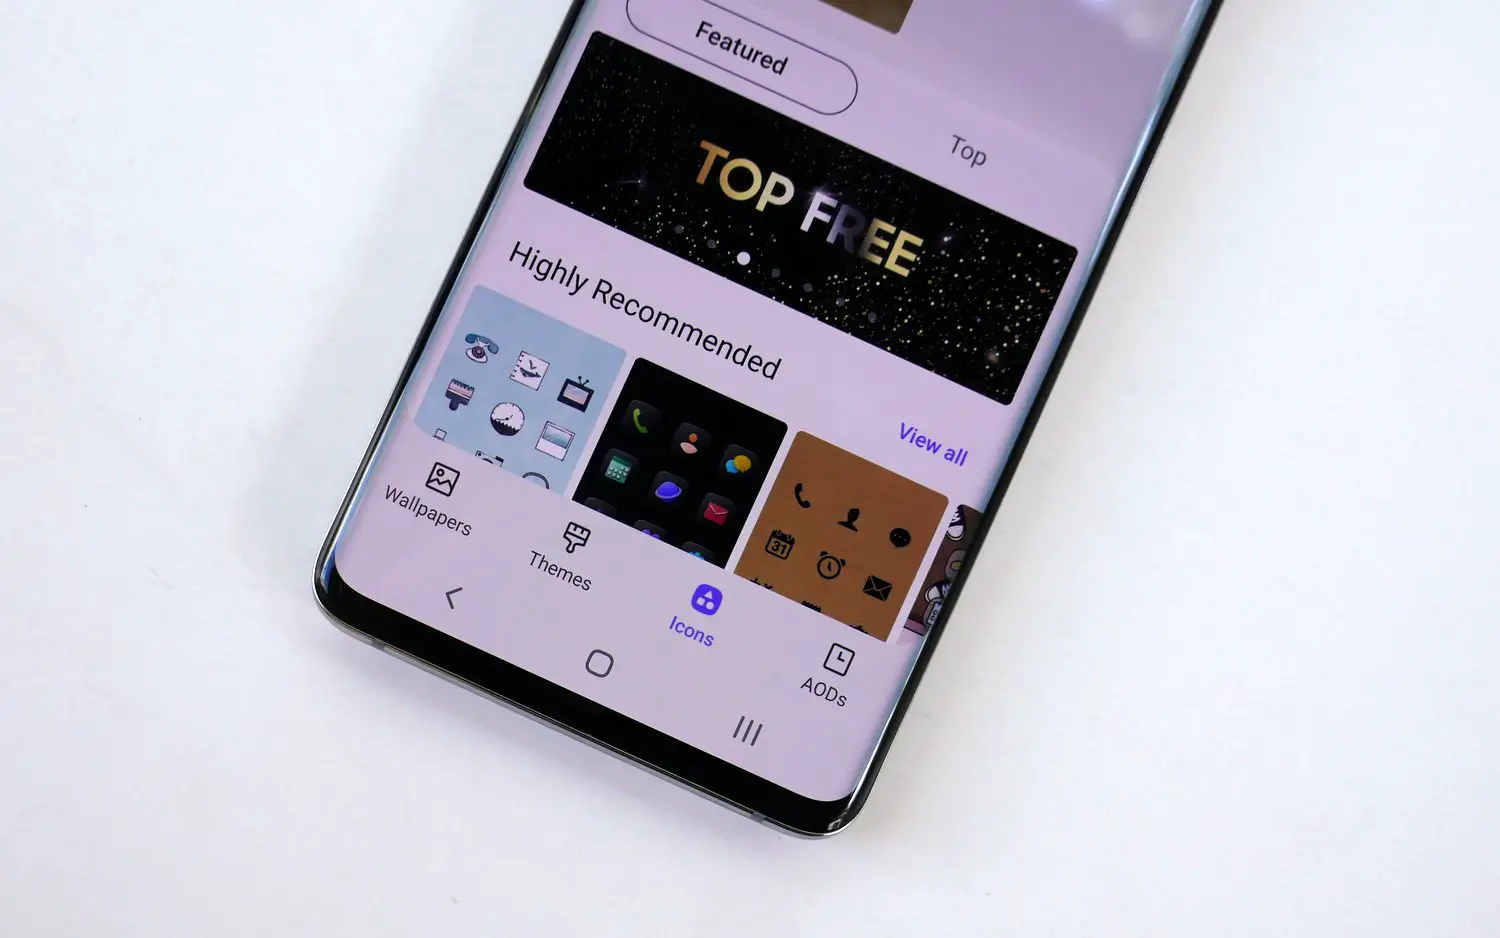 Samsung galaxy s 10 tips and tricks